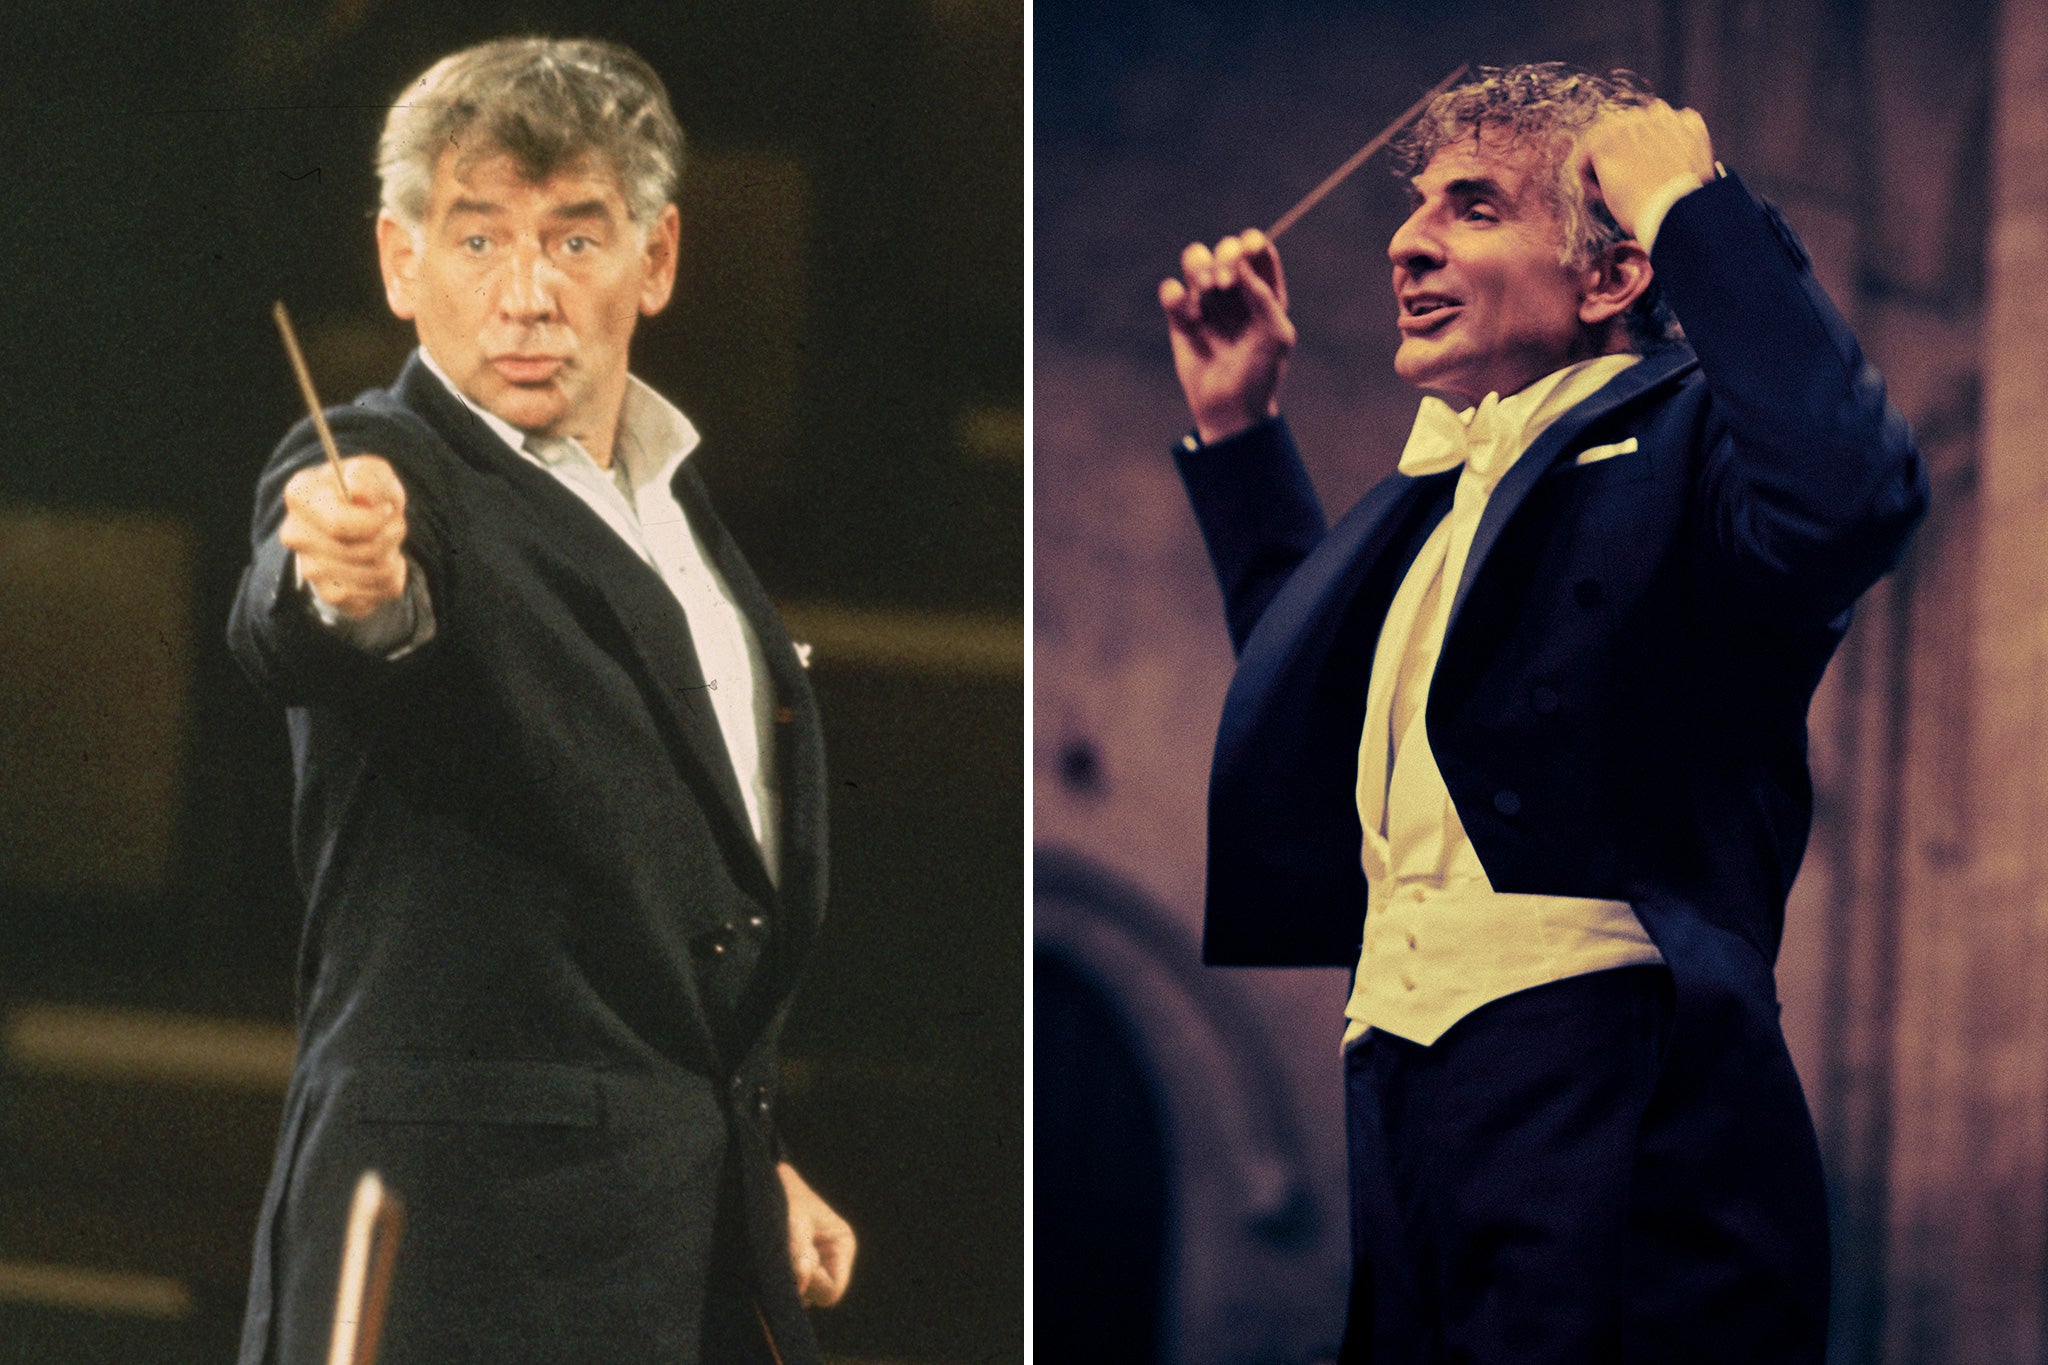 Leonard Bernstein was one of the 20th century’s most gifted composers and conductors